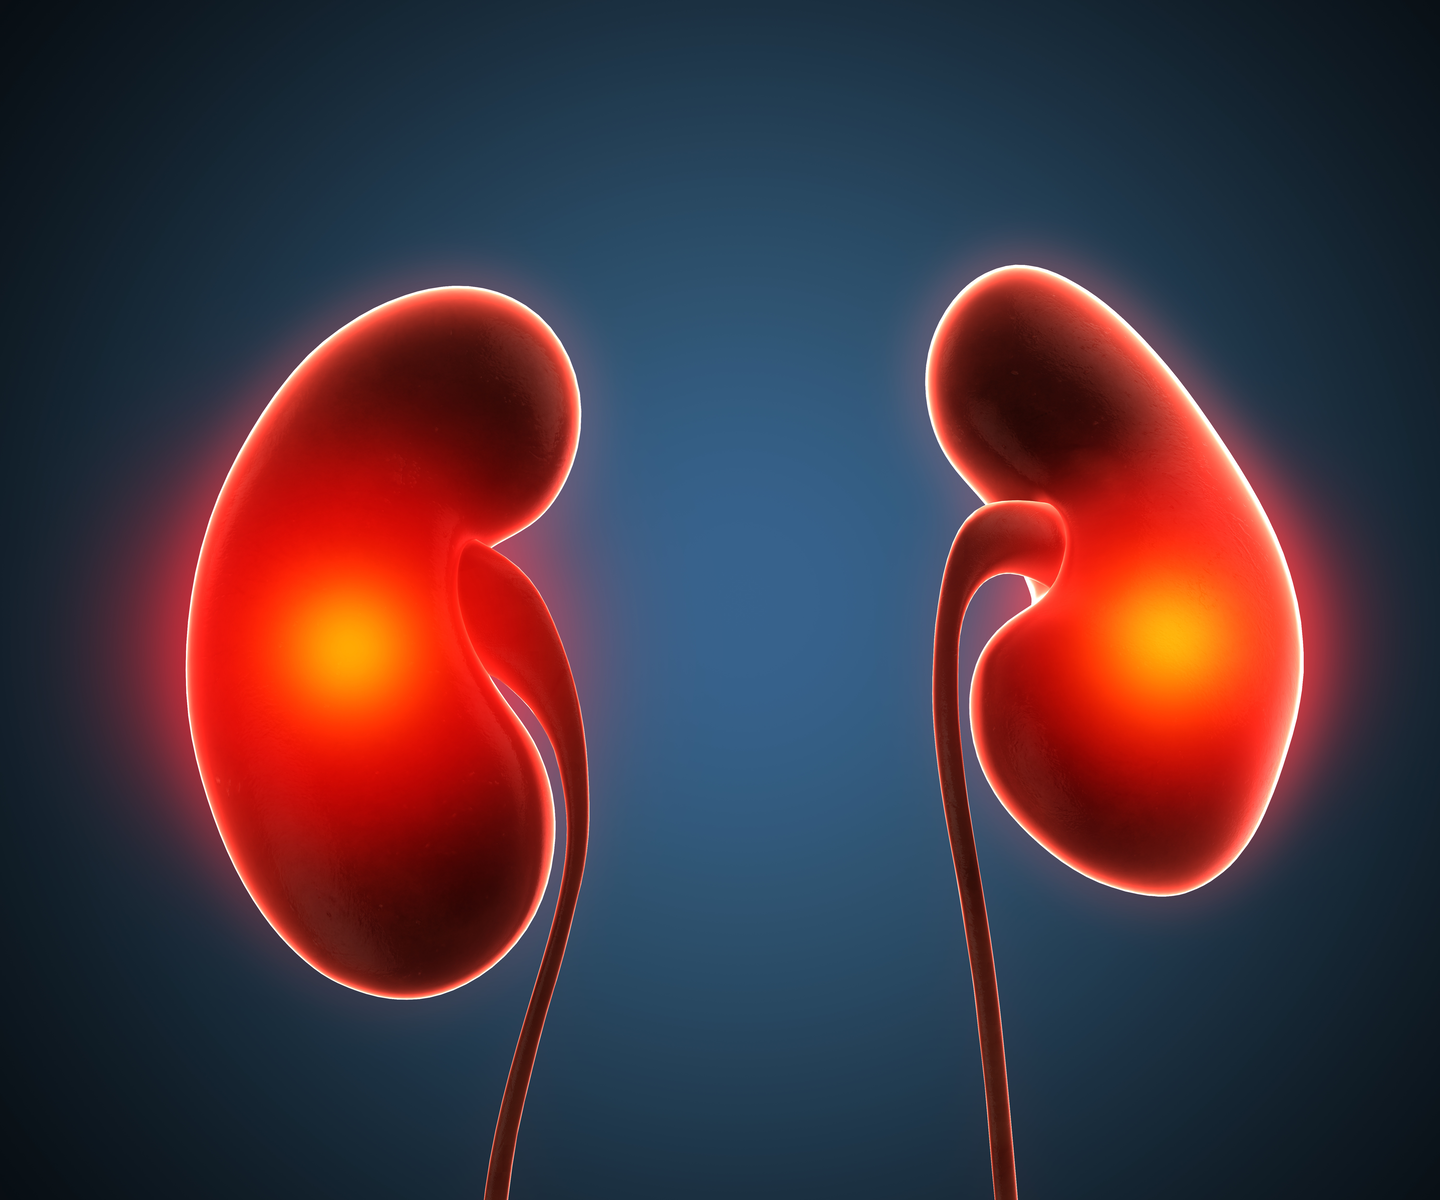 Short-Term Use of Gentamicin Does Not Harm Kidneys, Study Finds